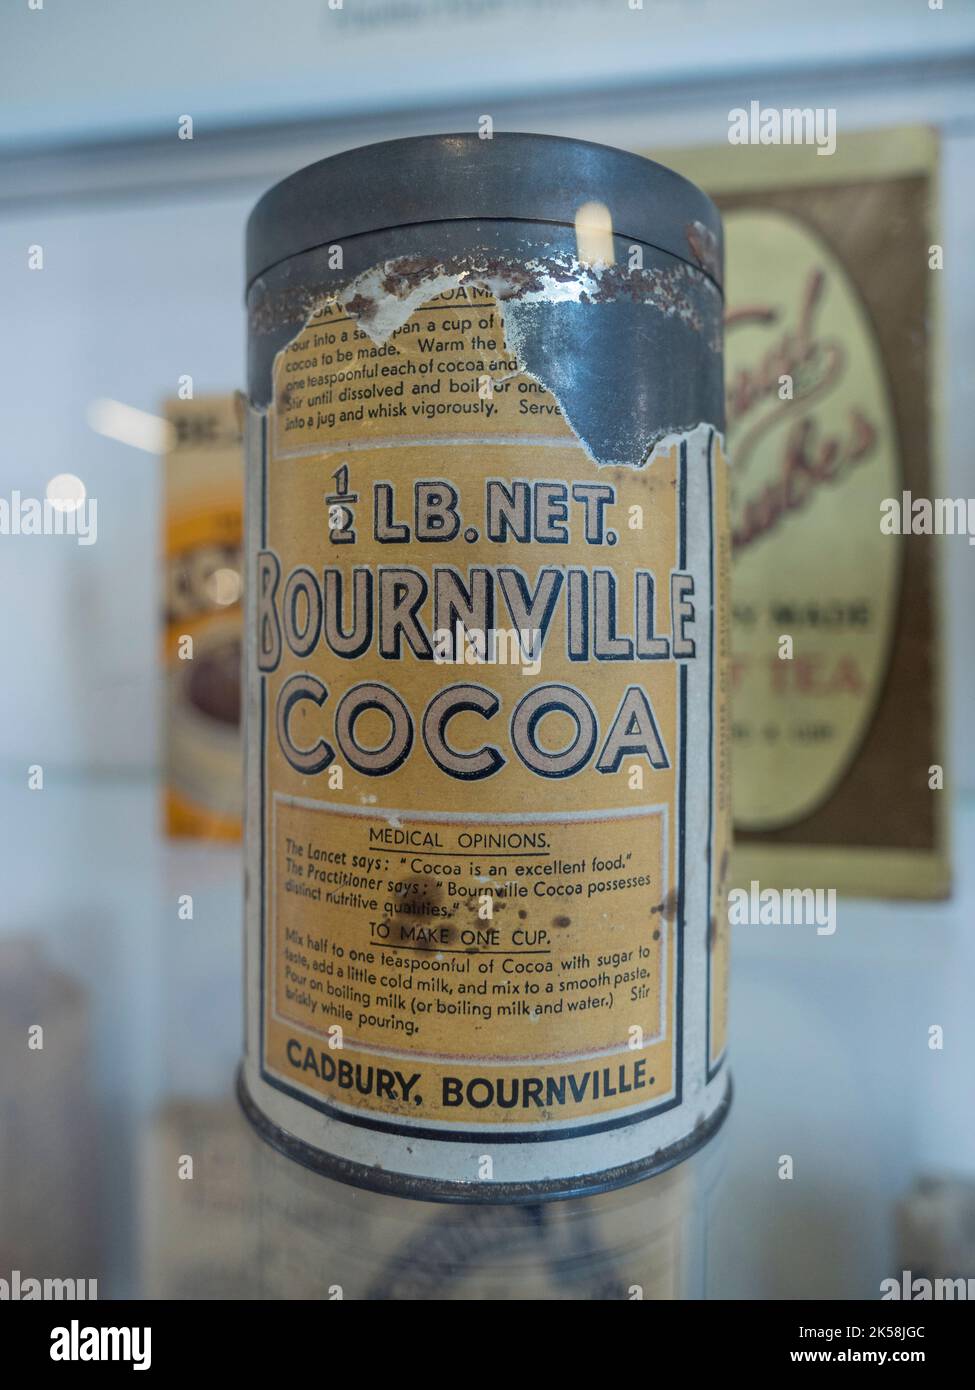 A 1/2lb tin of Bournville Cocoa by Cadbury, Bournville in the Spitfire and Hurricane Memorial Museum, Ramsgate, Kent, UK. Stock Photo